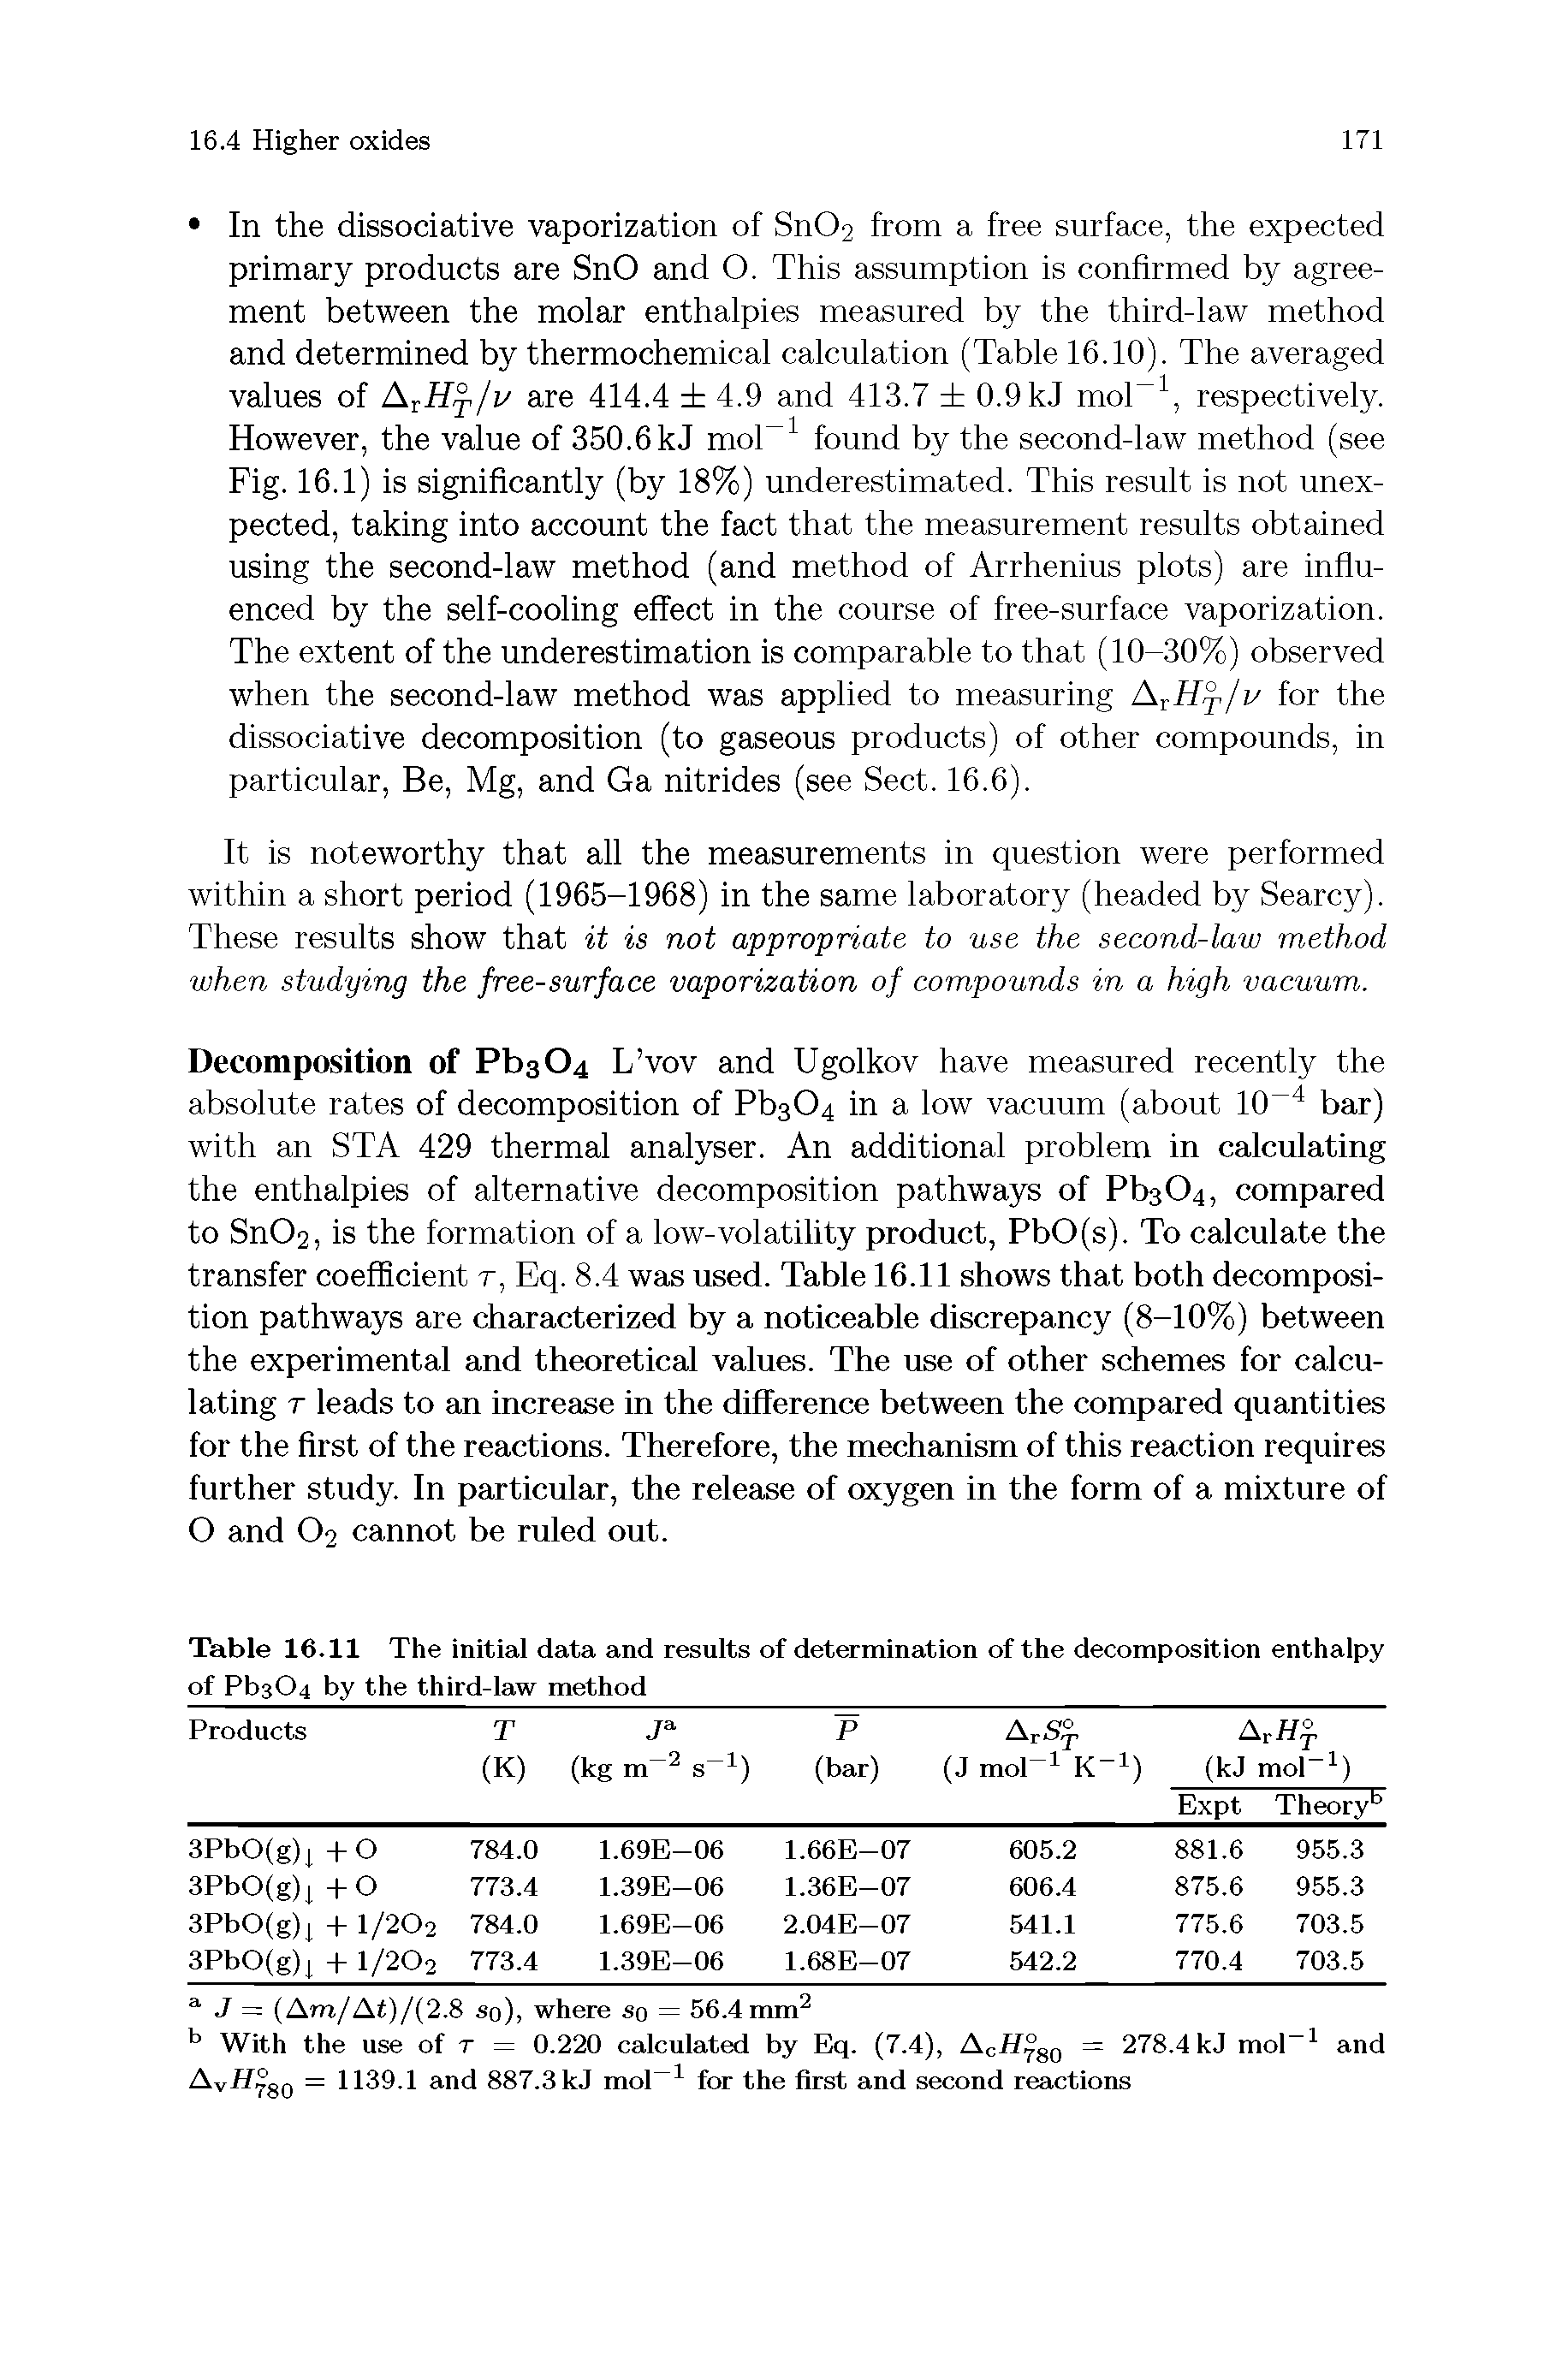 Table 16.11 The initial data and results of determination of the decomposition enthalpy of Pb304 by the third-law method...